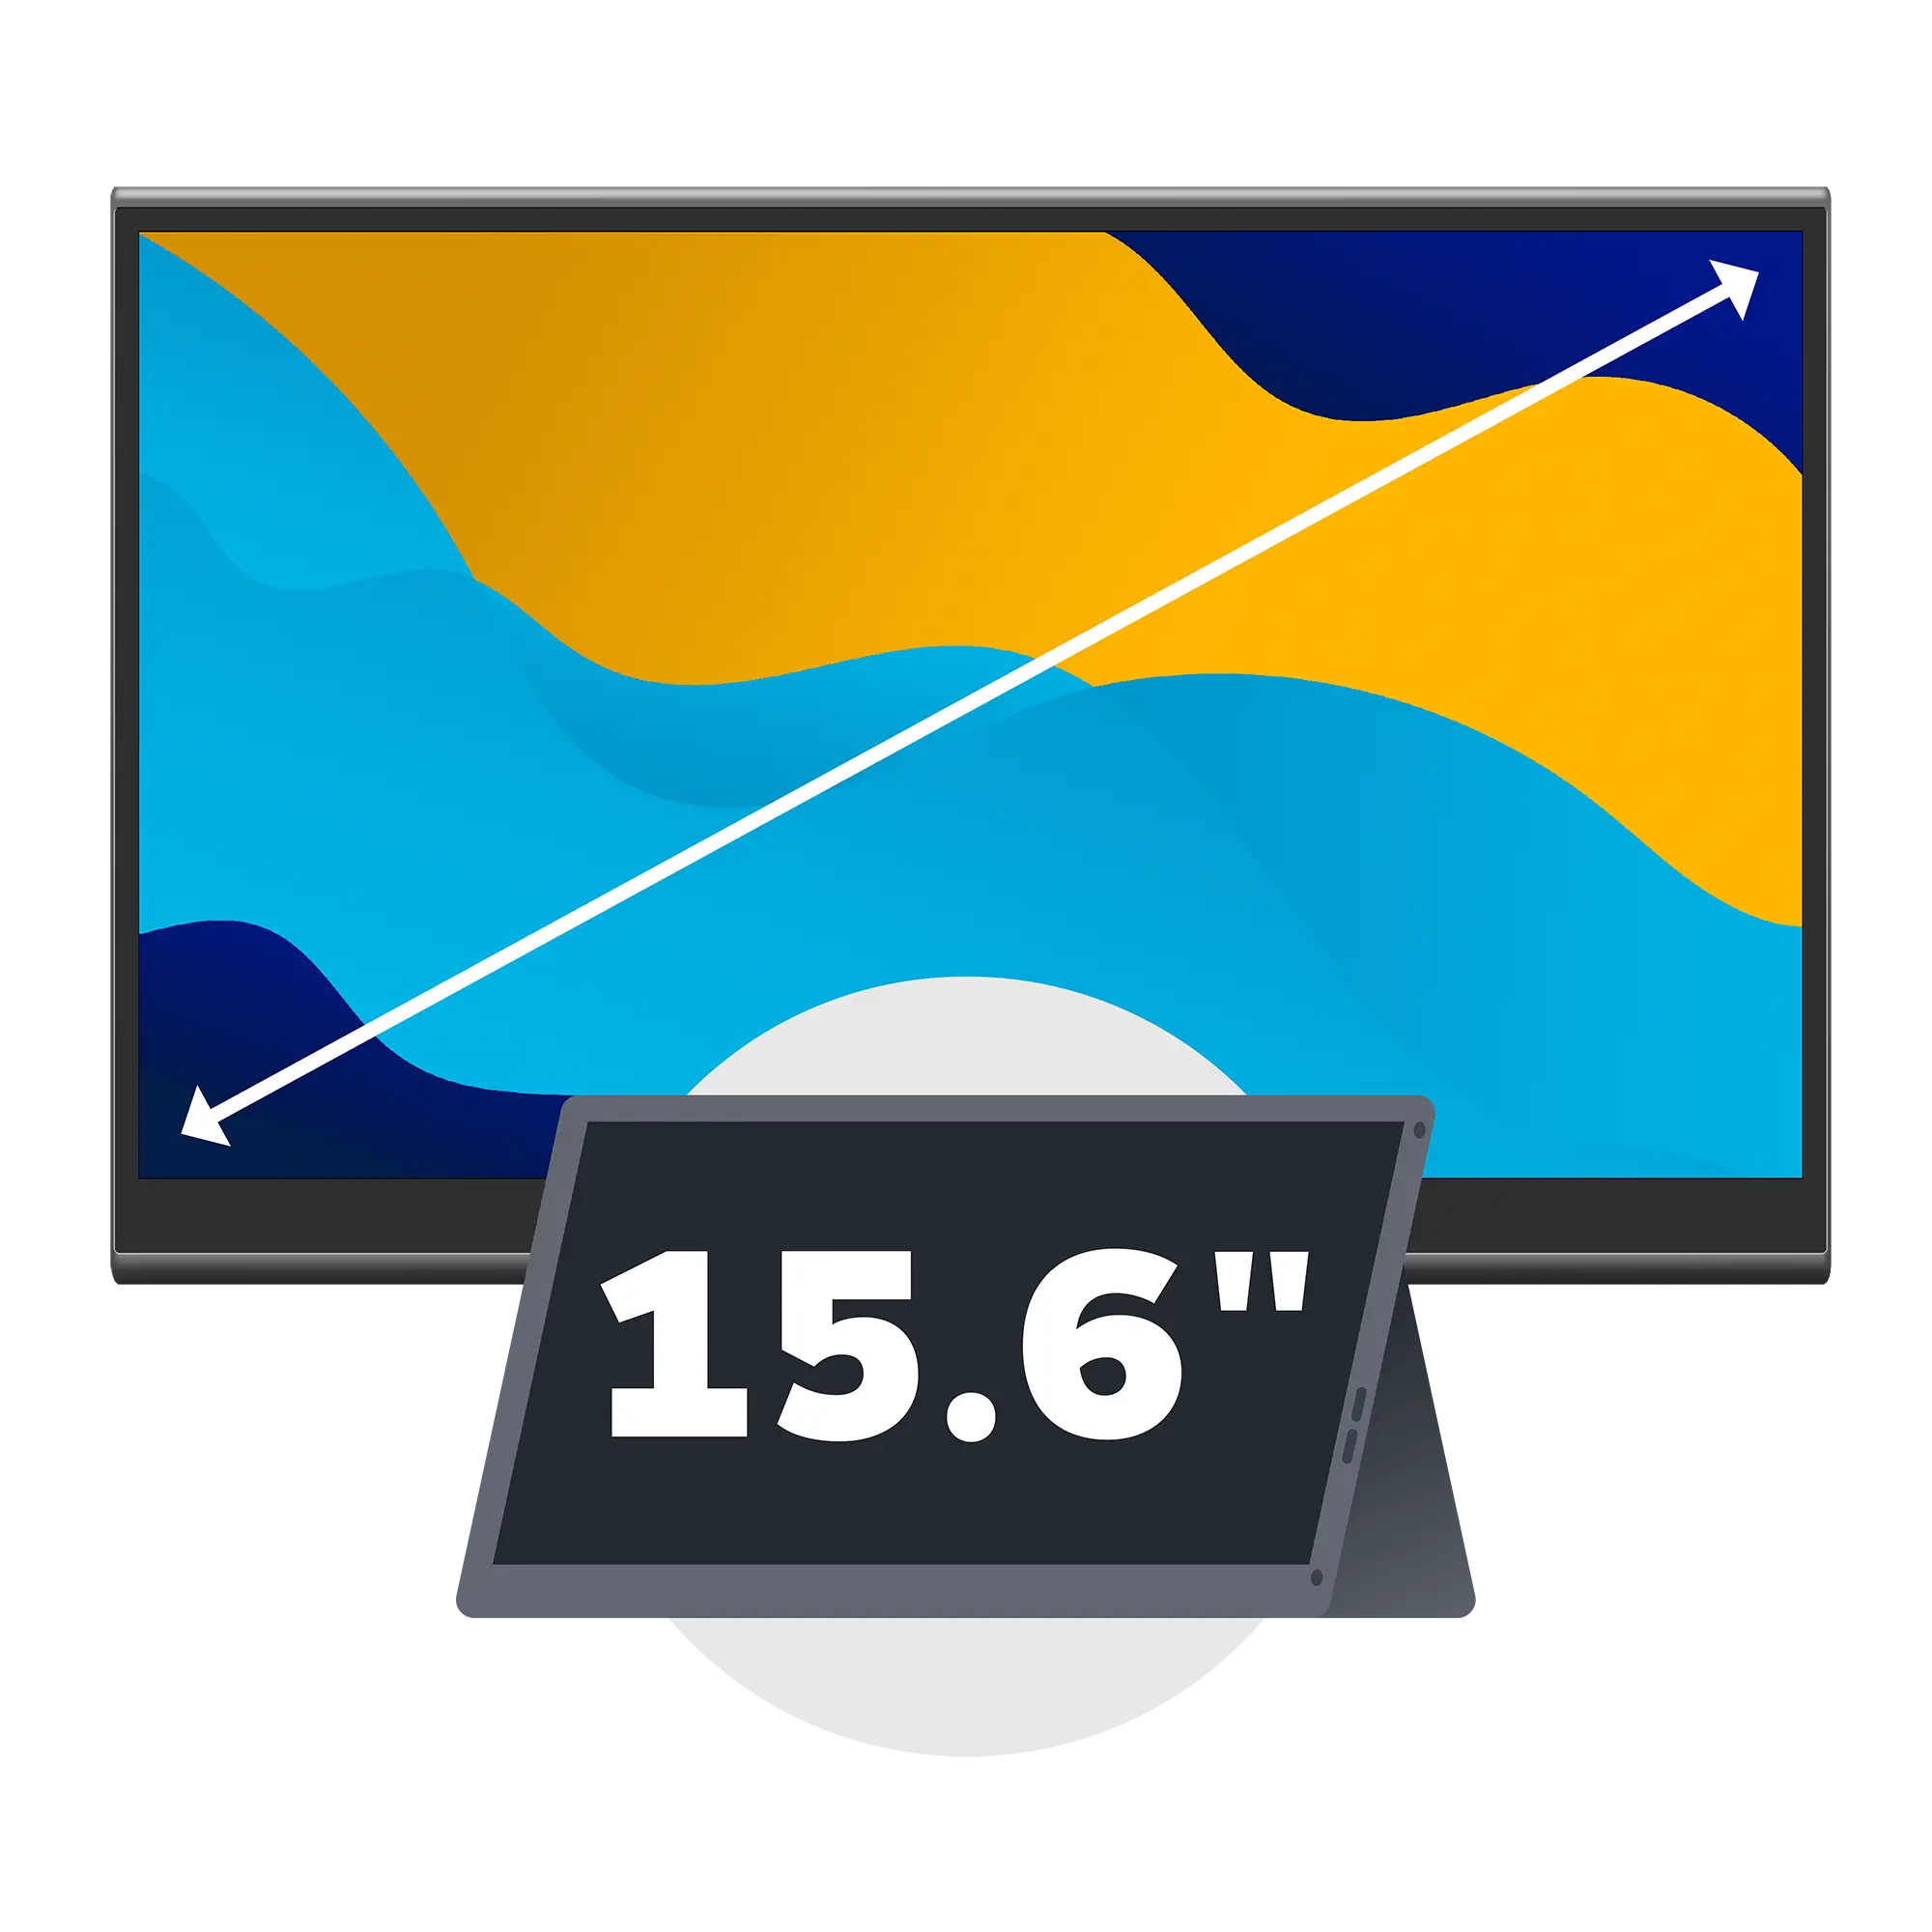 Portable monitor with 15.6" icon